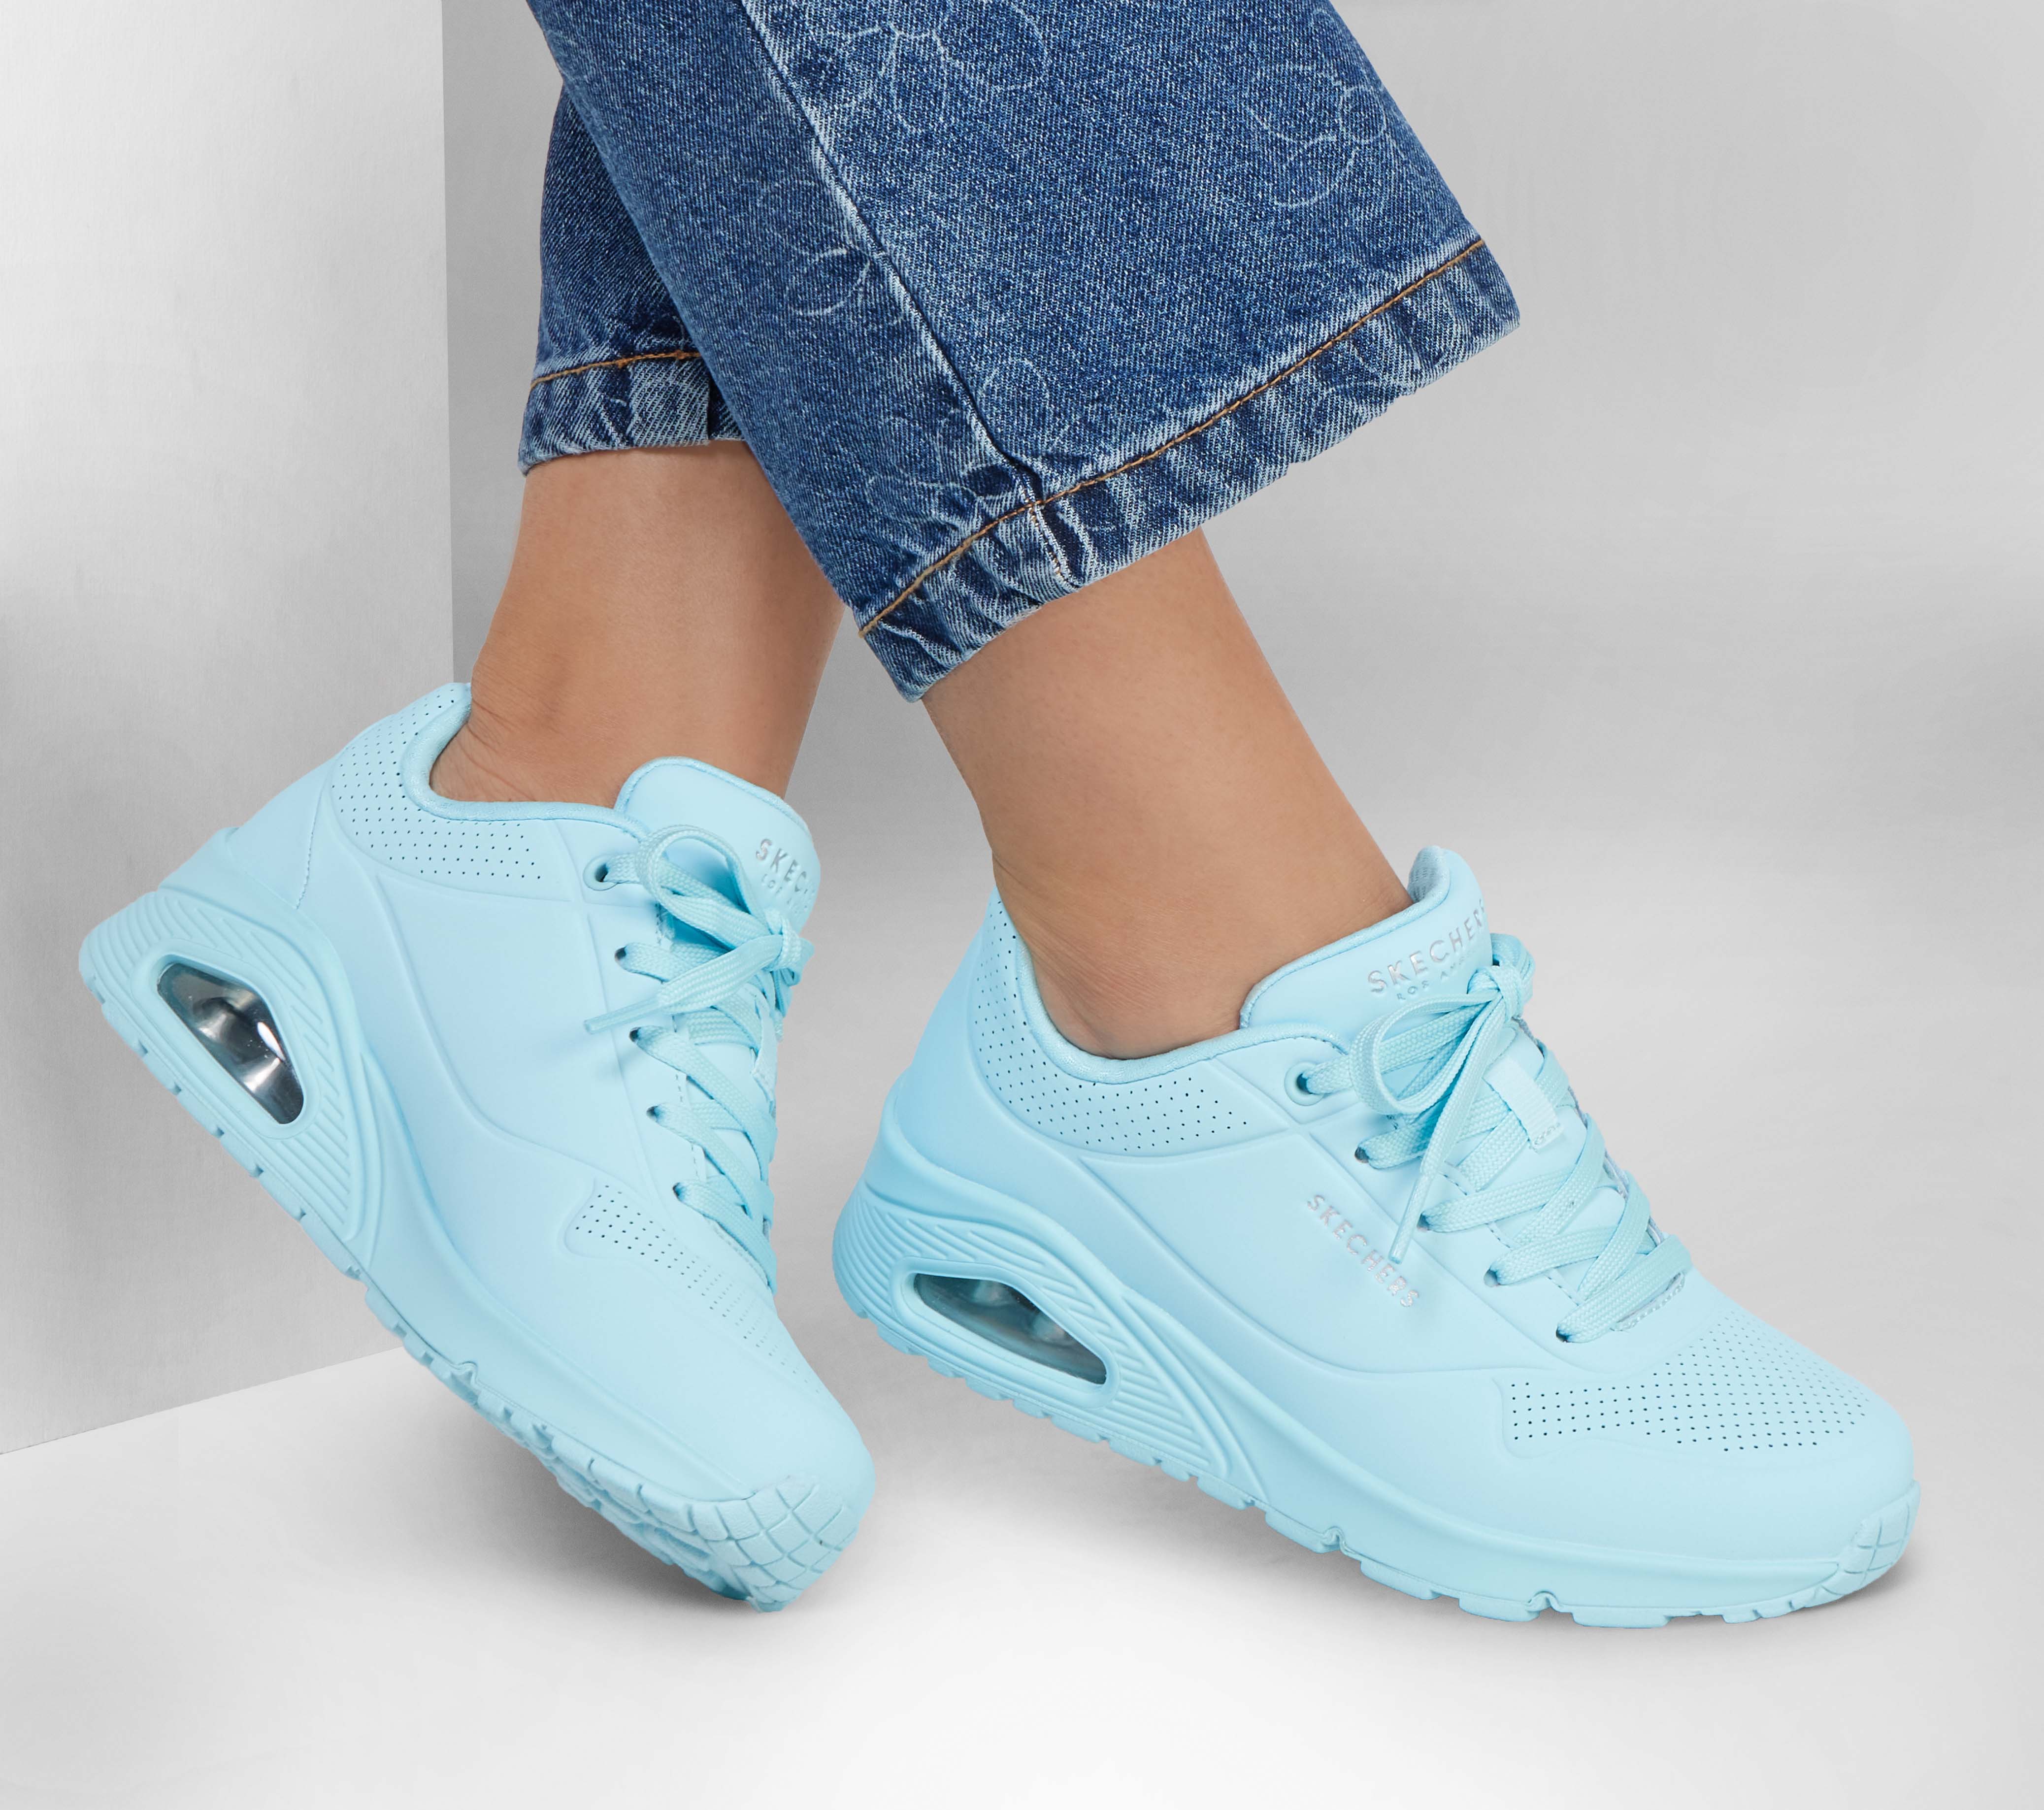 Skechers Ireland on X: Classic air cushioned style meets updated comfort  in the #SKECHERS Street Uno - Stand on Air shoe 🌻 @palomafiuzaoficial    / X